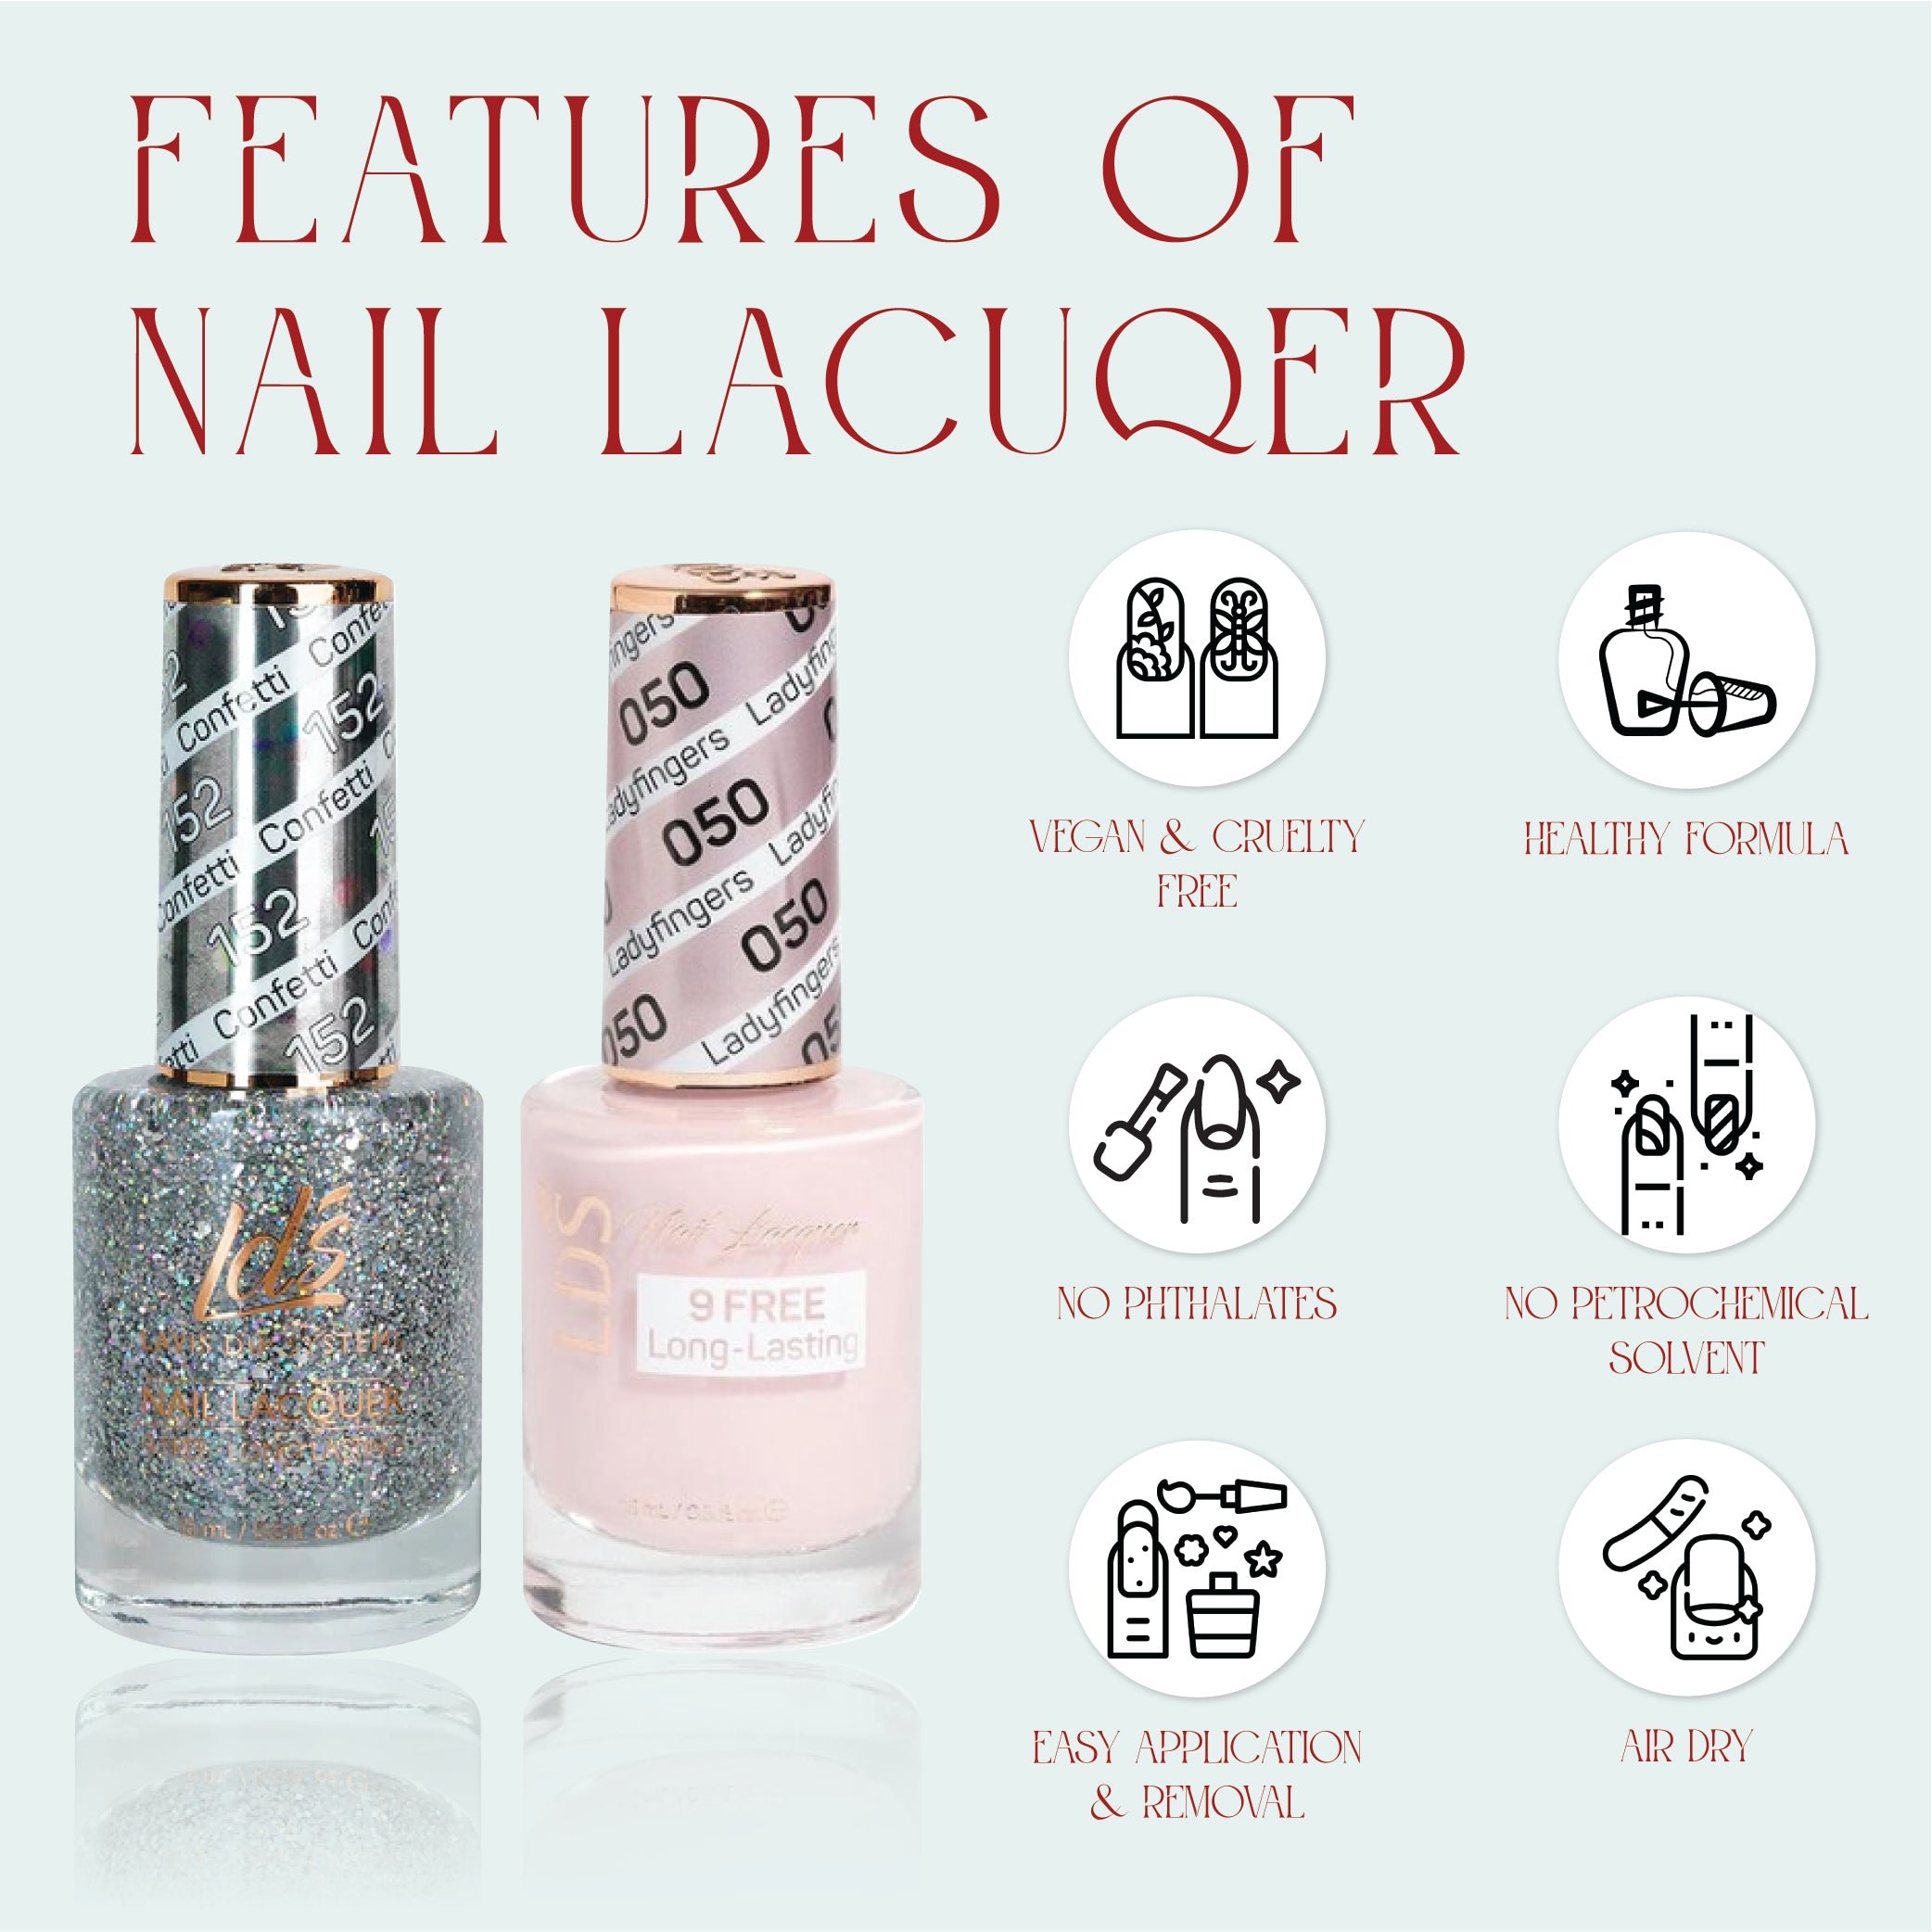 LDS 089 Be Fierce - LDS Nail Lacquer 0.5oz